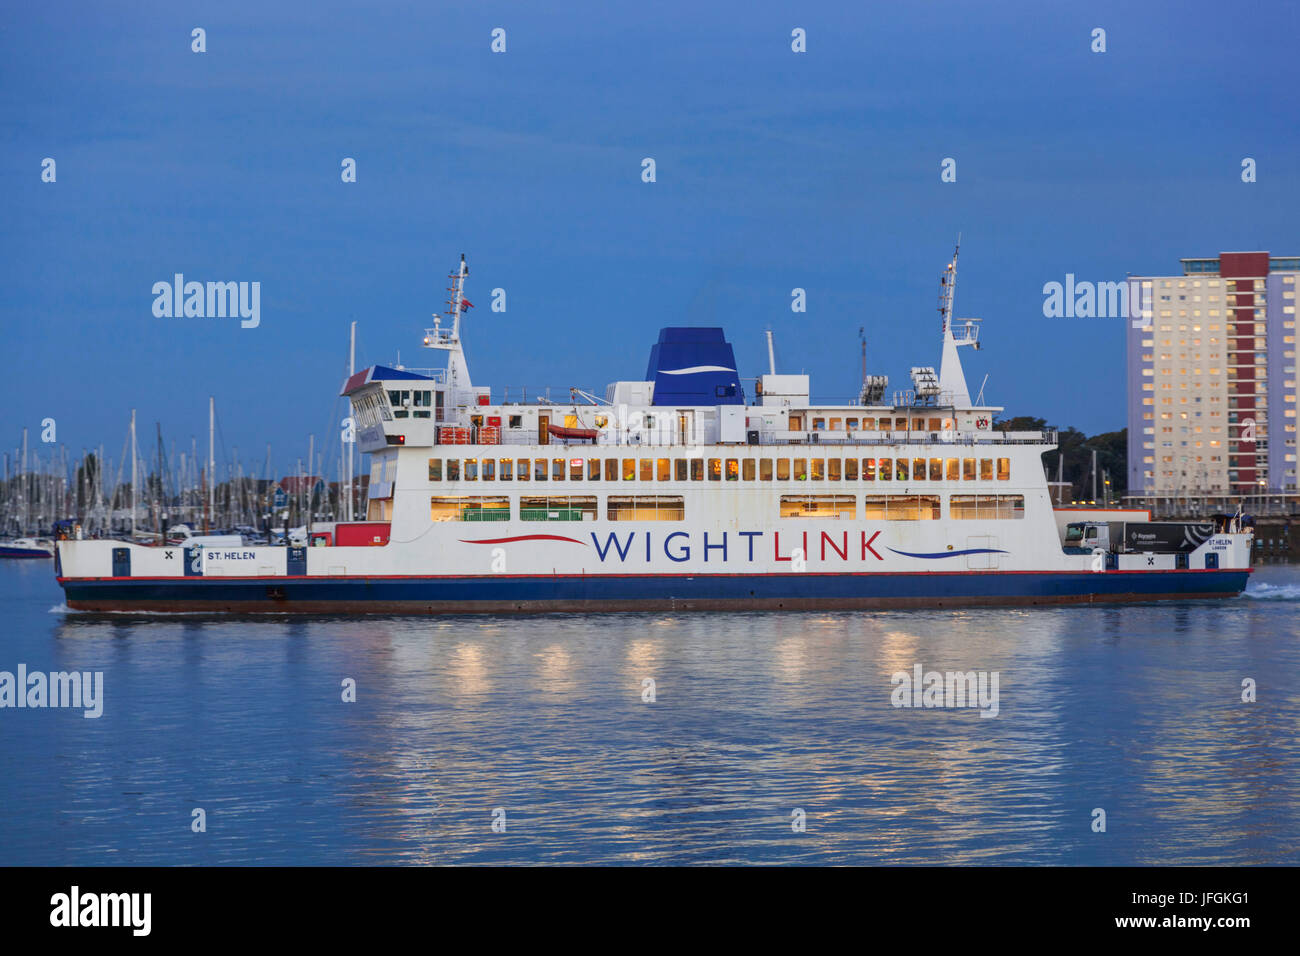 England, Hampshire, Portsmouth, Wightlink Ferry Stock Photo